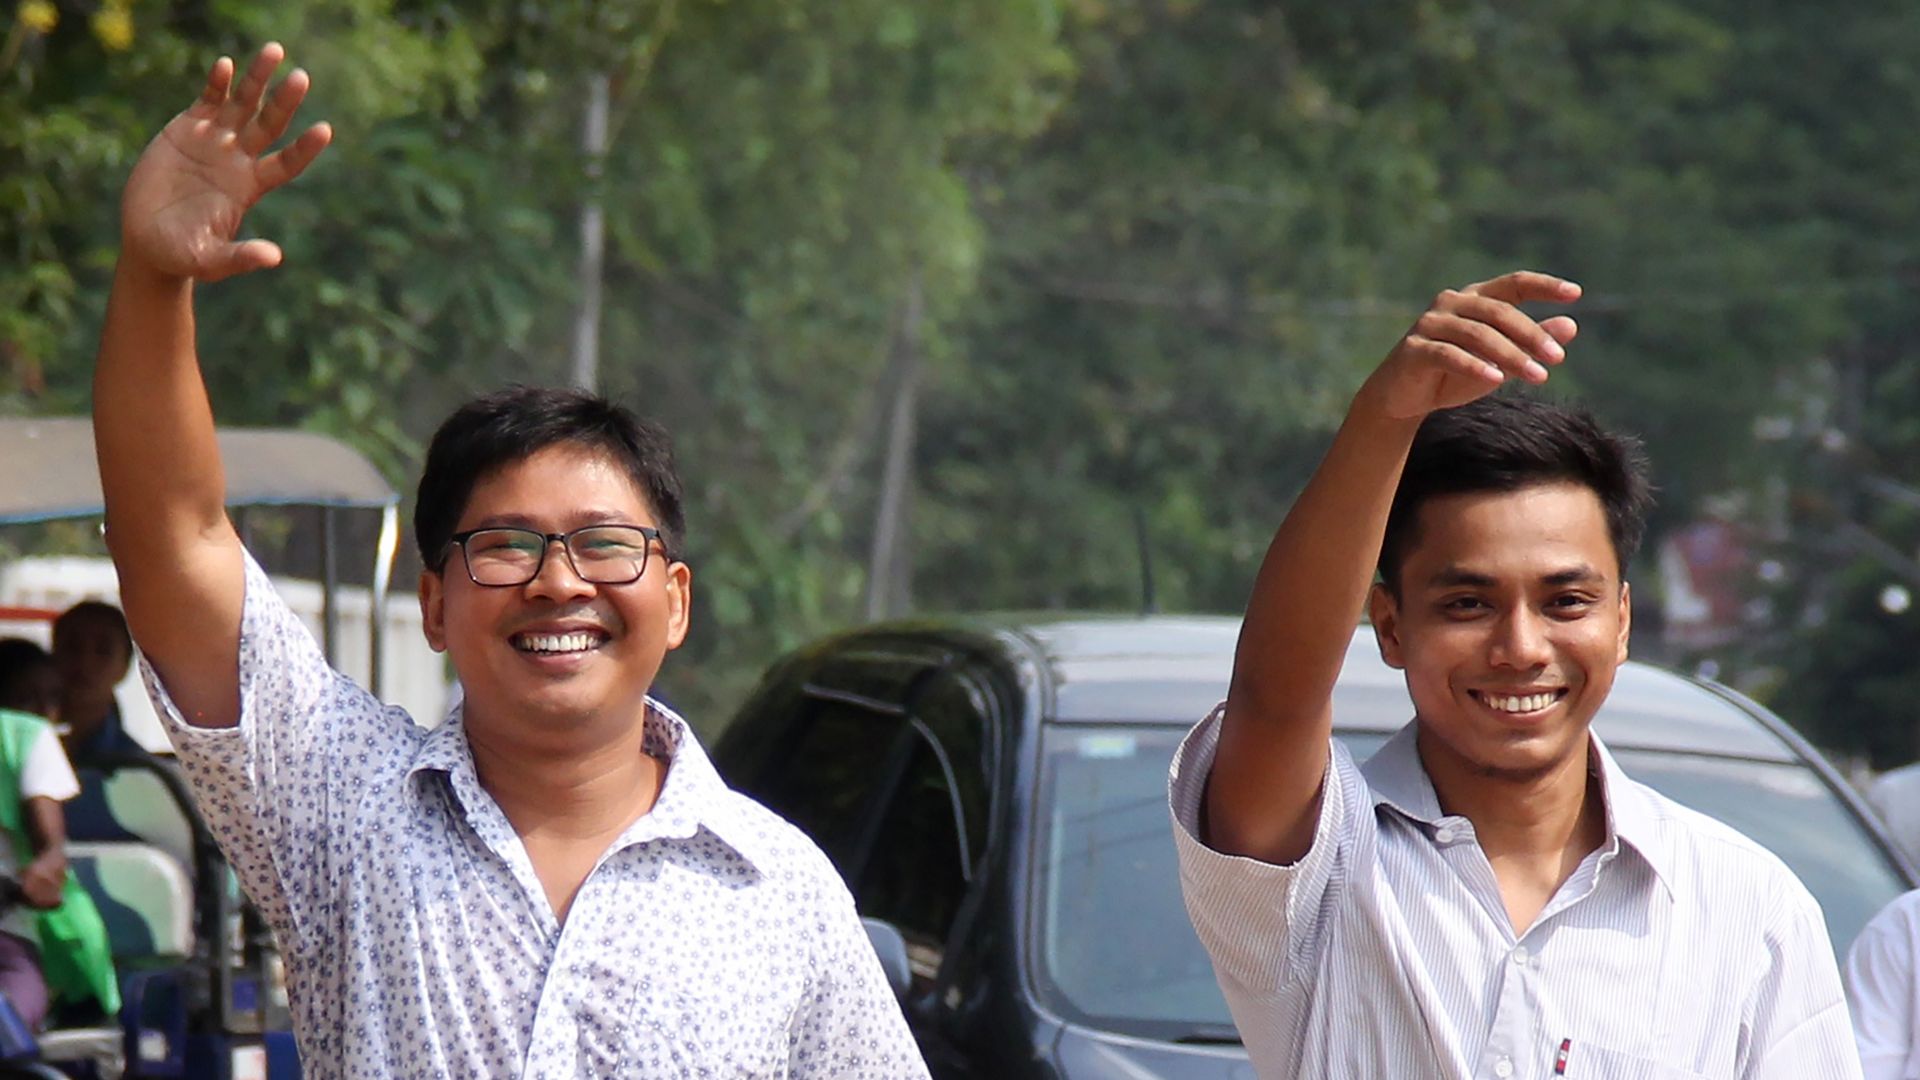 Reuters journalists Wa Lone (L) and Kyaw Soe Oo gesture outside Insein prison after being freed in a presidential amnesty in Yangon on Tuesday local time.